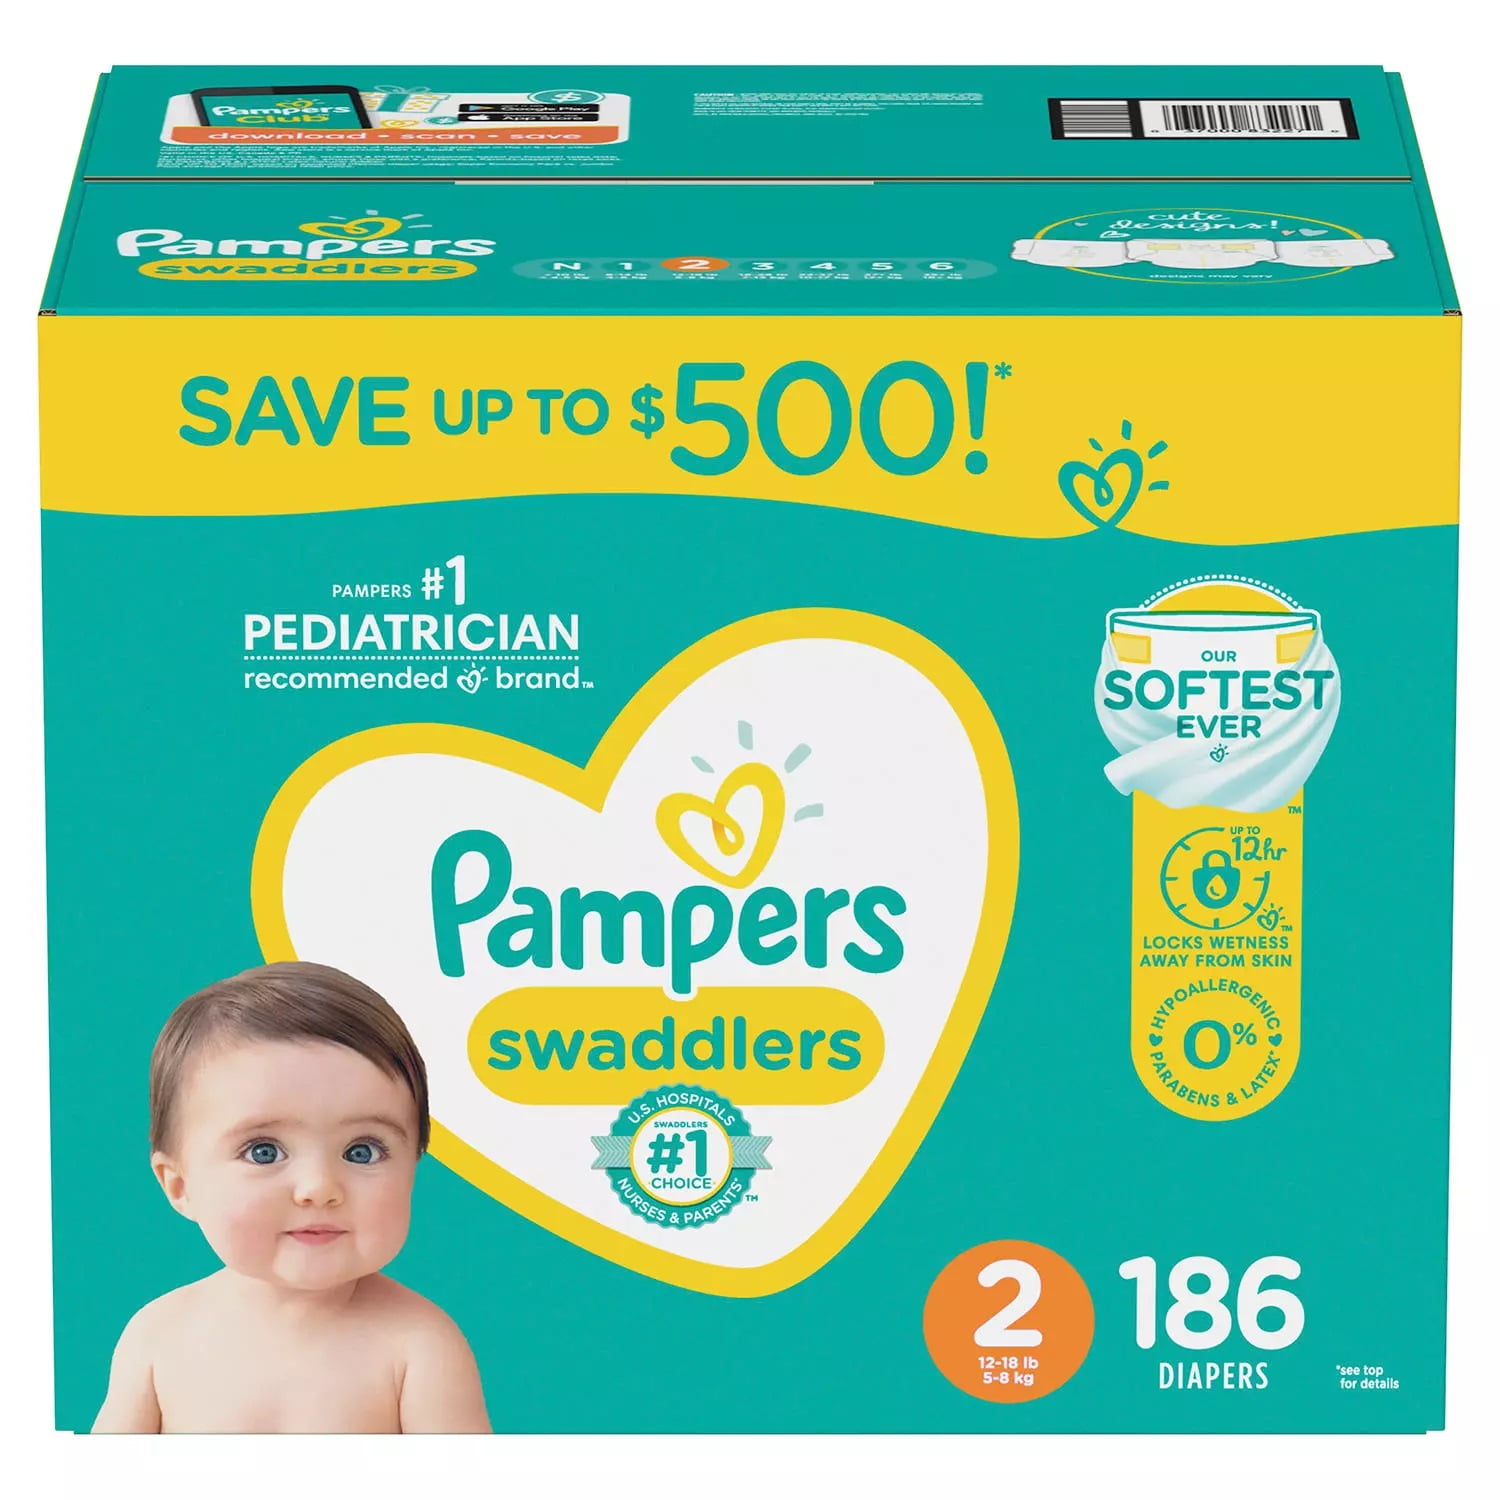 Forensische geneeskunde Concreet Prematuur Pampers Swaddlers Diapers, Size 2 (12-18 Pounds), 180 Count - Walmart.com